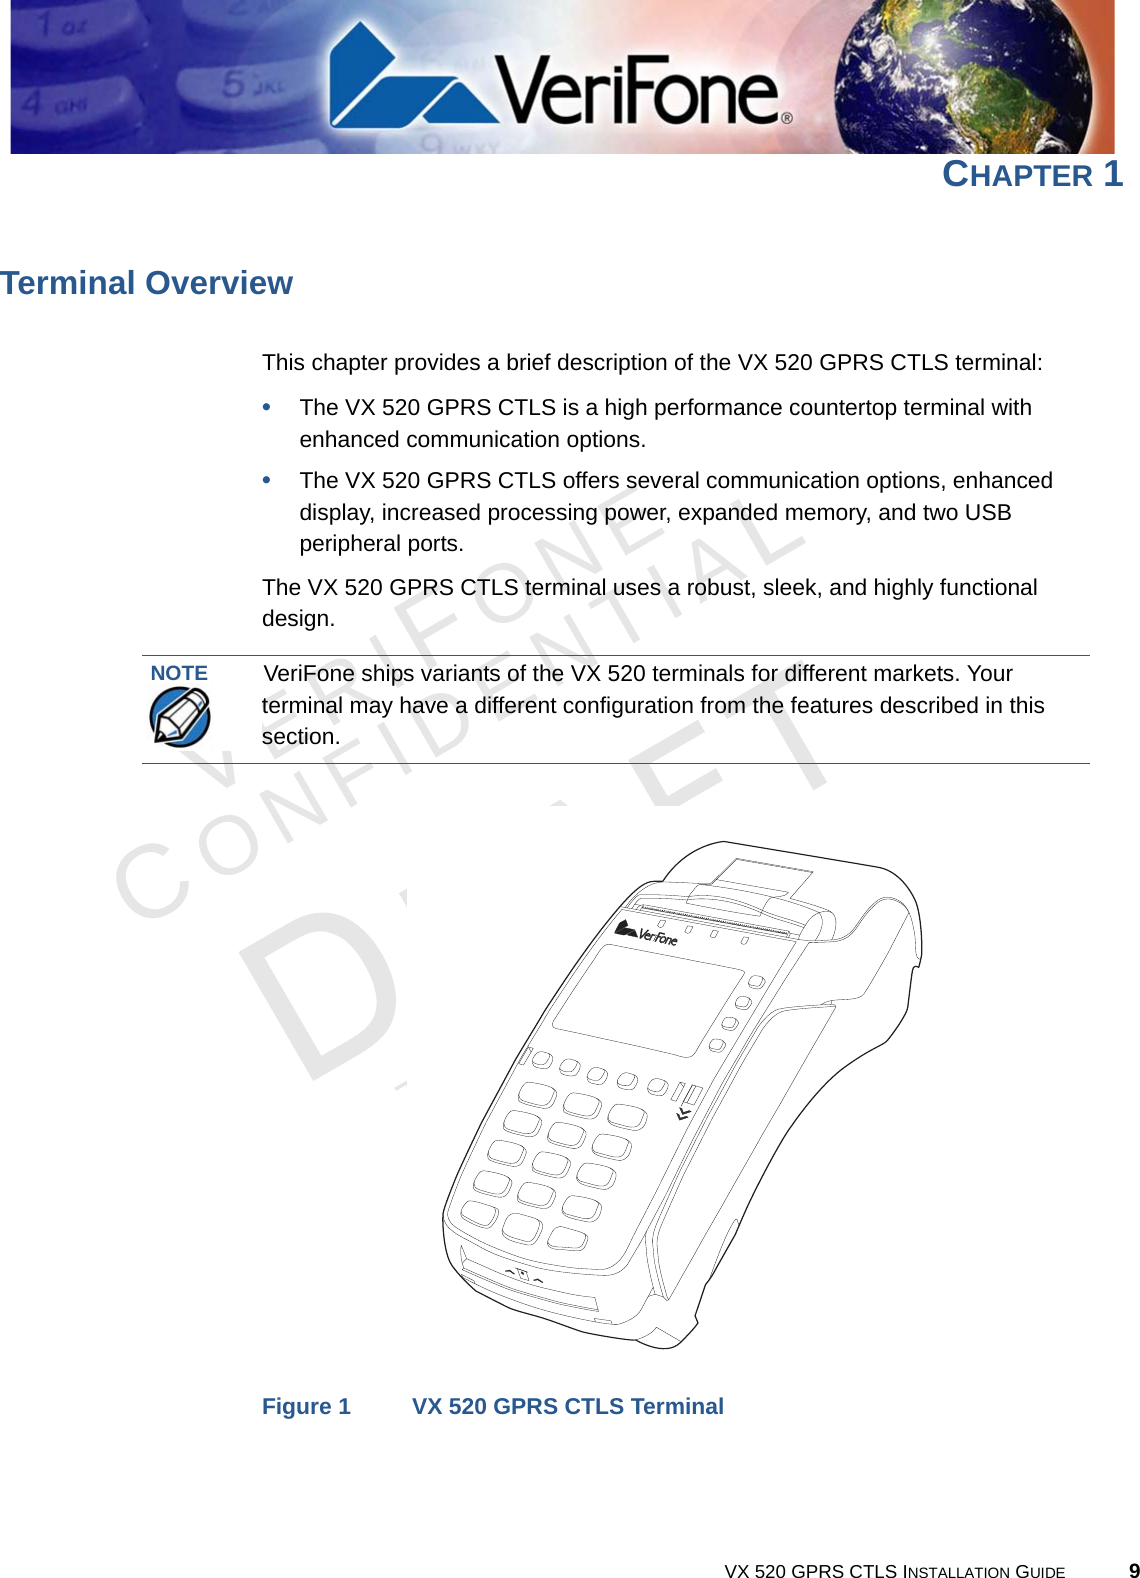 VERIFONECONFIDENTIALTEMPLATE REV F VX 520 GPRS CTLS INSTALLATION GUIDE 9CHAPTER 1Terminal OverviewThis chapter provides a brief description of the VX 520 GPRS CTLS terminal:•The VX 520 GPRS CTLS is a high performance countertop terminal with enhanced communication options.•The VX 520 GPRS CTLS offers several communication options, enhanced display, increased processing power, expanded memory, and two USB peripheral ports.The VX 520 GPRS CTLS terminal uses a robust, sleek, and highly functional design.Figure 1 VX 520 GPRS CTLS TerminalNOTEVeriFone ships variants of the VX 520 terminals for different markets. Your terminal may have a different configuration from the features described in this section.